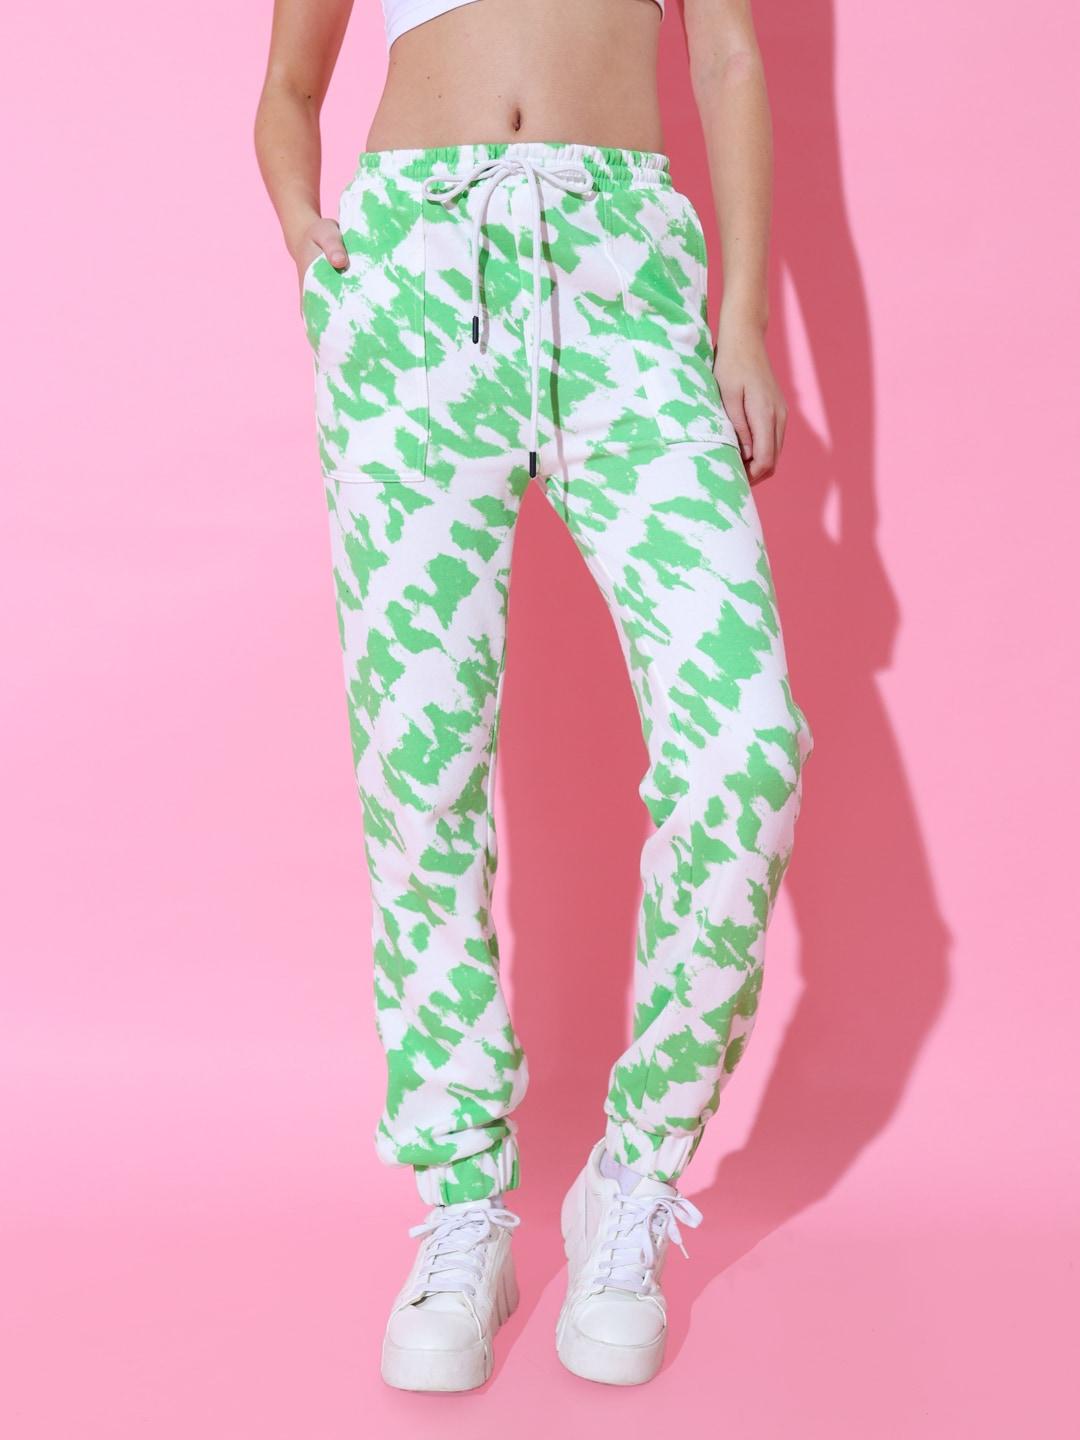 stylecast-x-hersheinbox-women-pure-cotton-mid-rise-printed-joggers